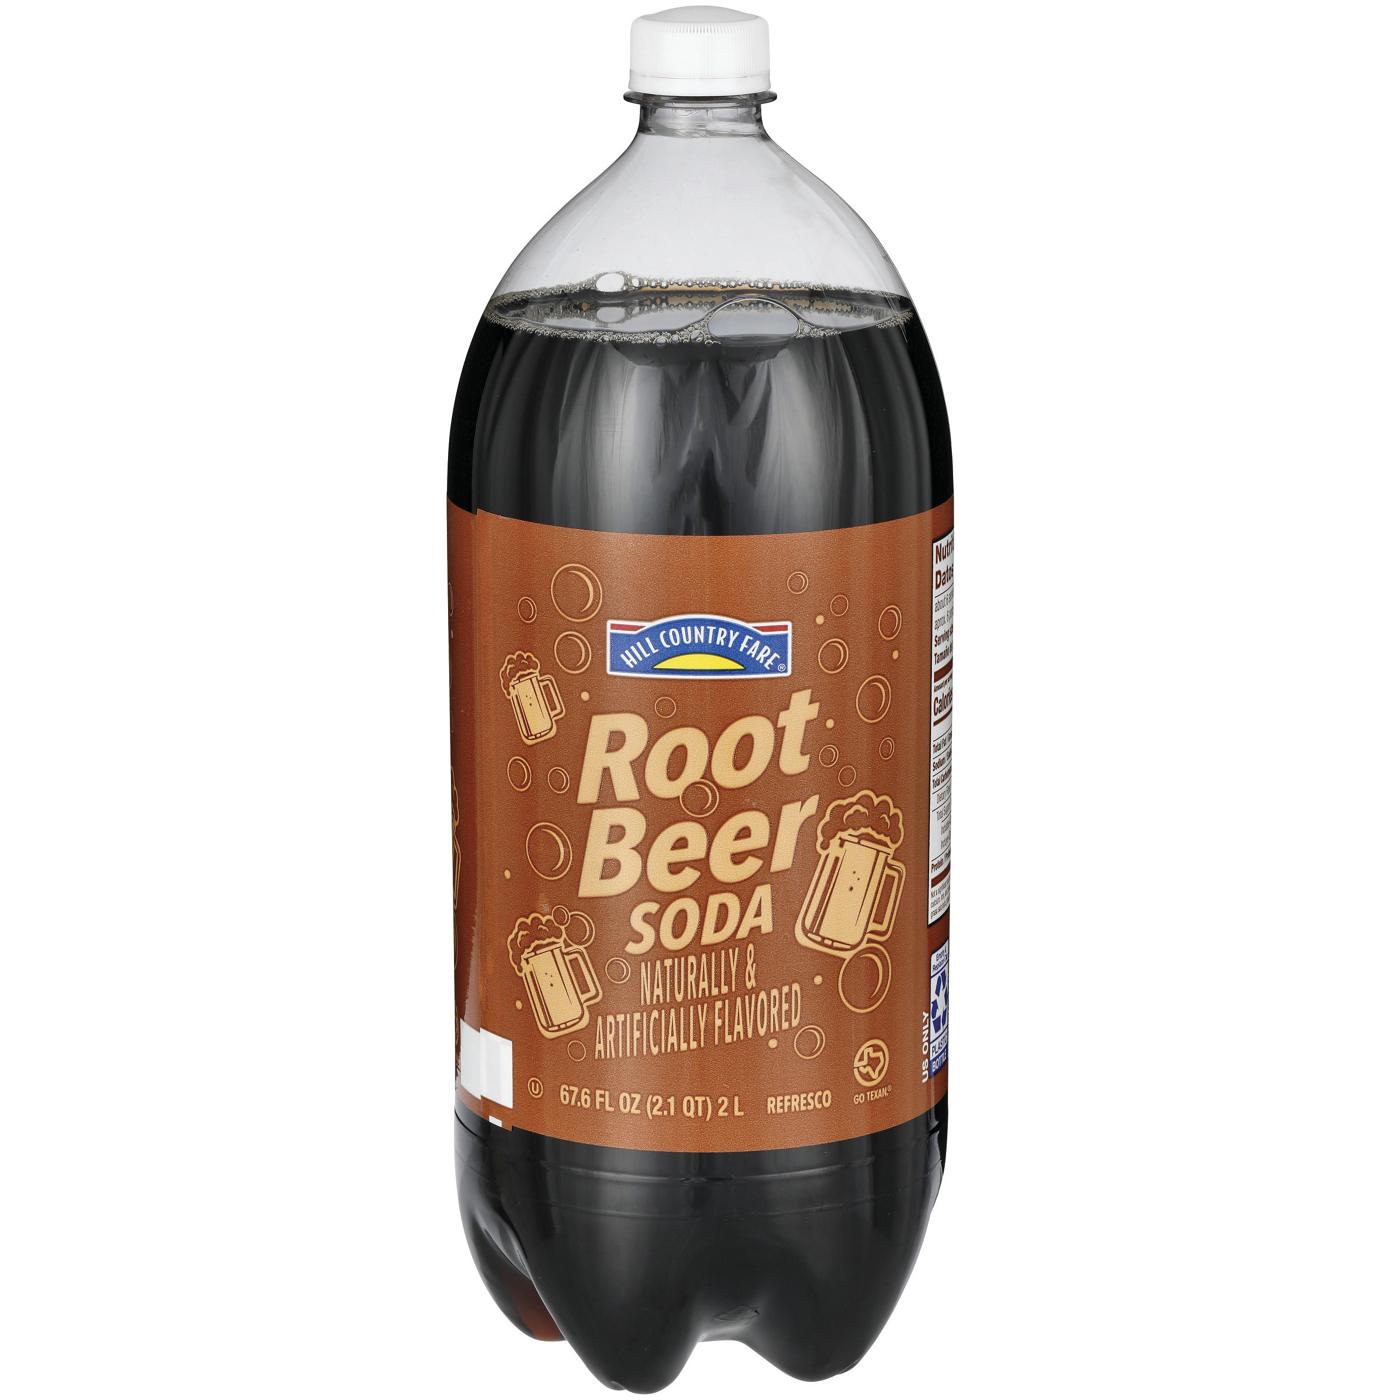 HCF Hill Country Fair Root Beer Soda; image 2 of 2